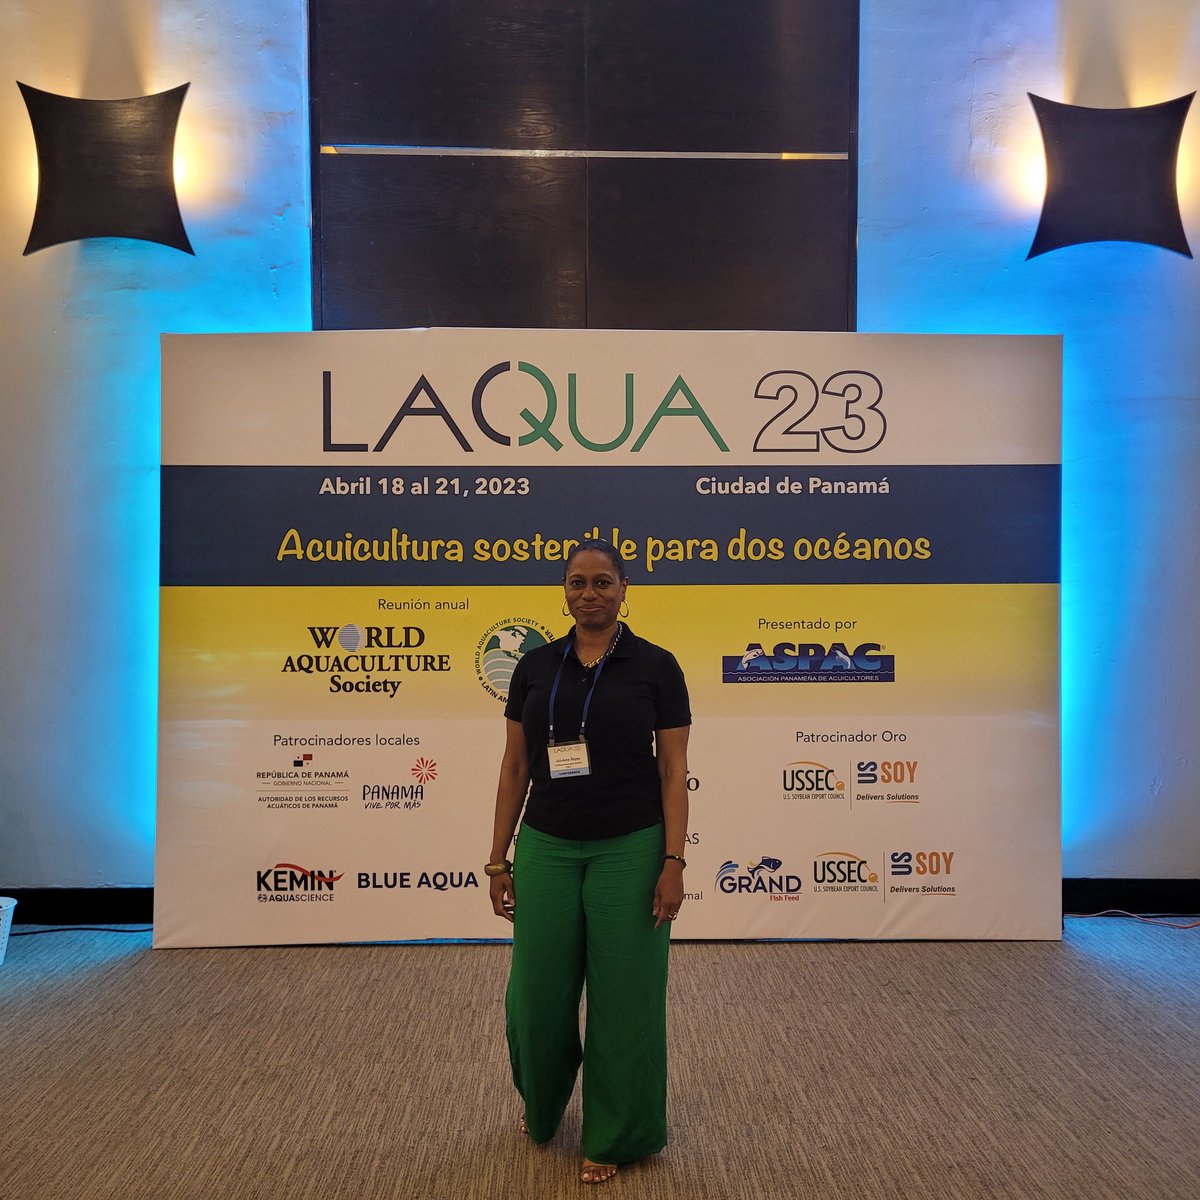 Thanks to @BioMarGroup I was the only English-speaking Caribbean presenter at the #laqua23 Latin American and Caribbean chapter @WrldAquaculture This year I will be Chair of a special #Caribbean session